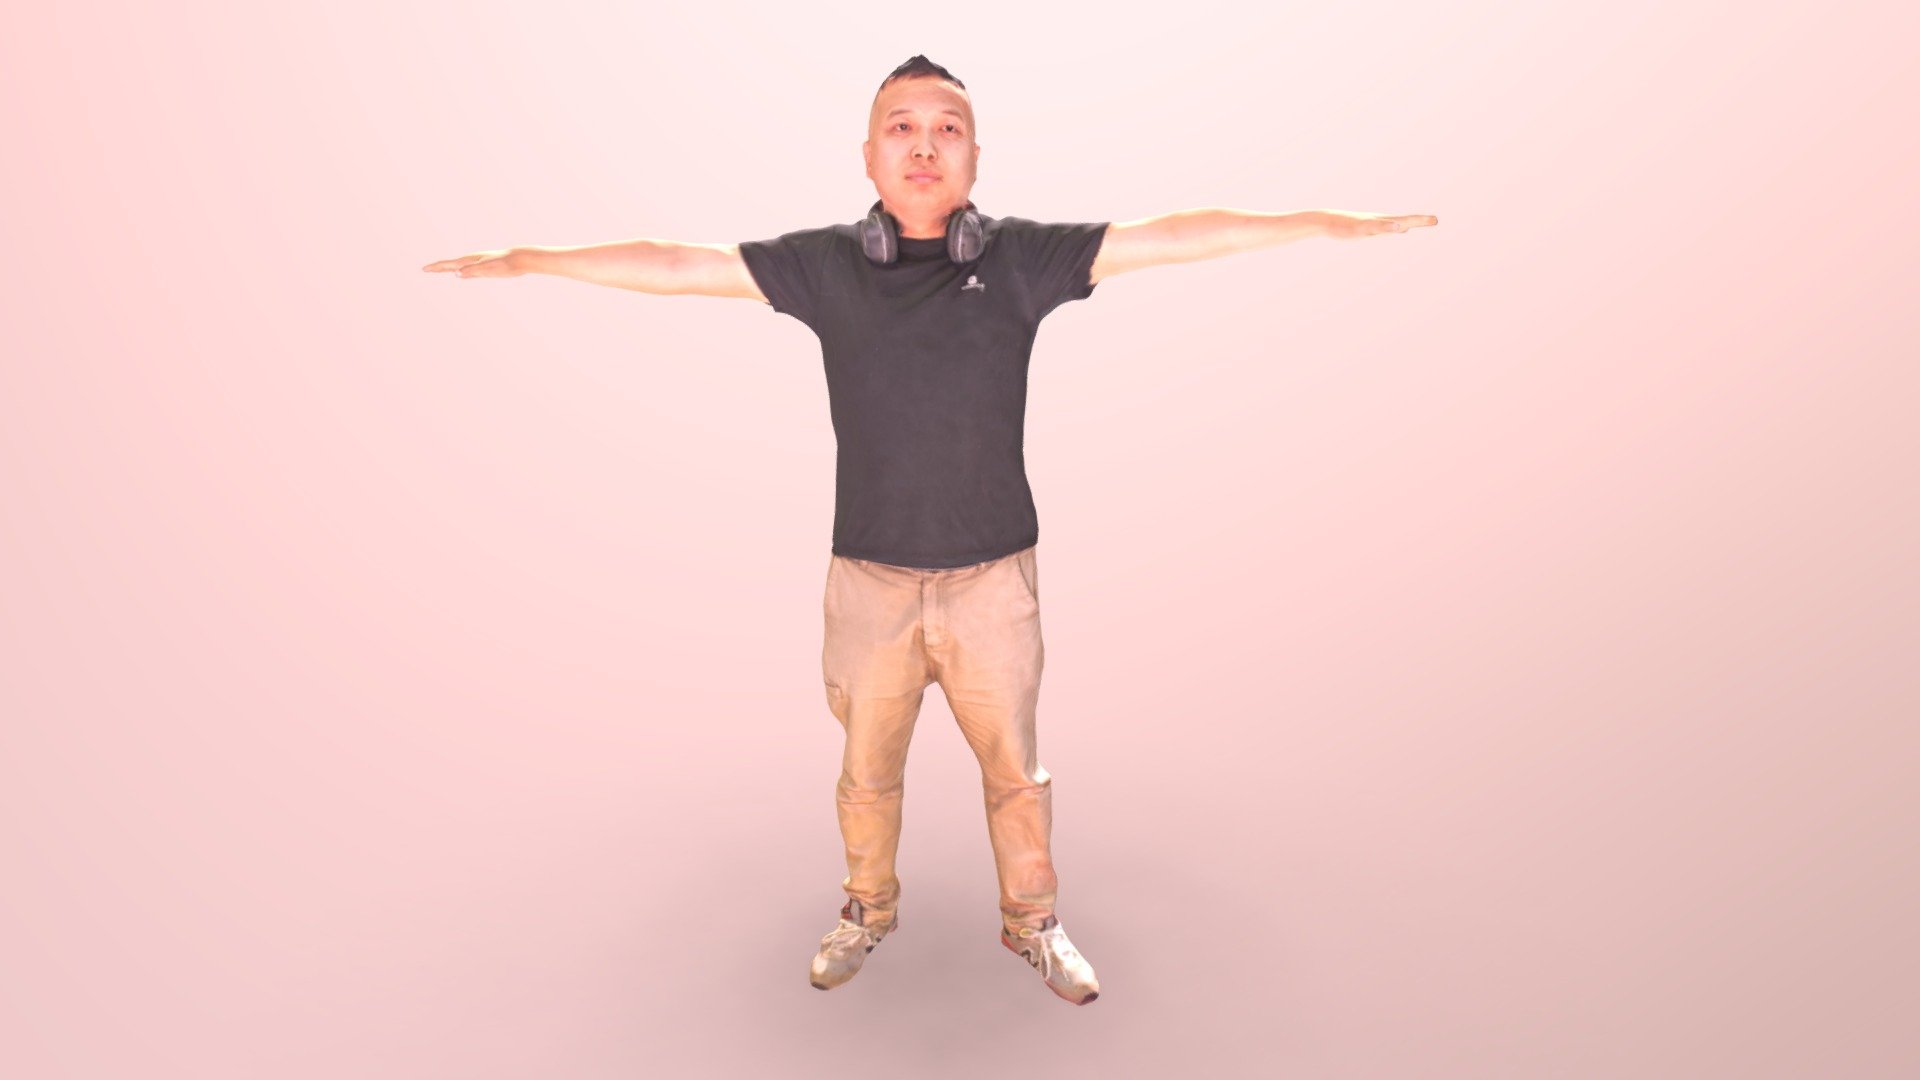 540-T POSE - 3D model by stupidboy34 3d model